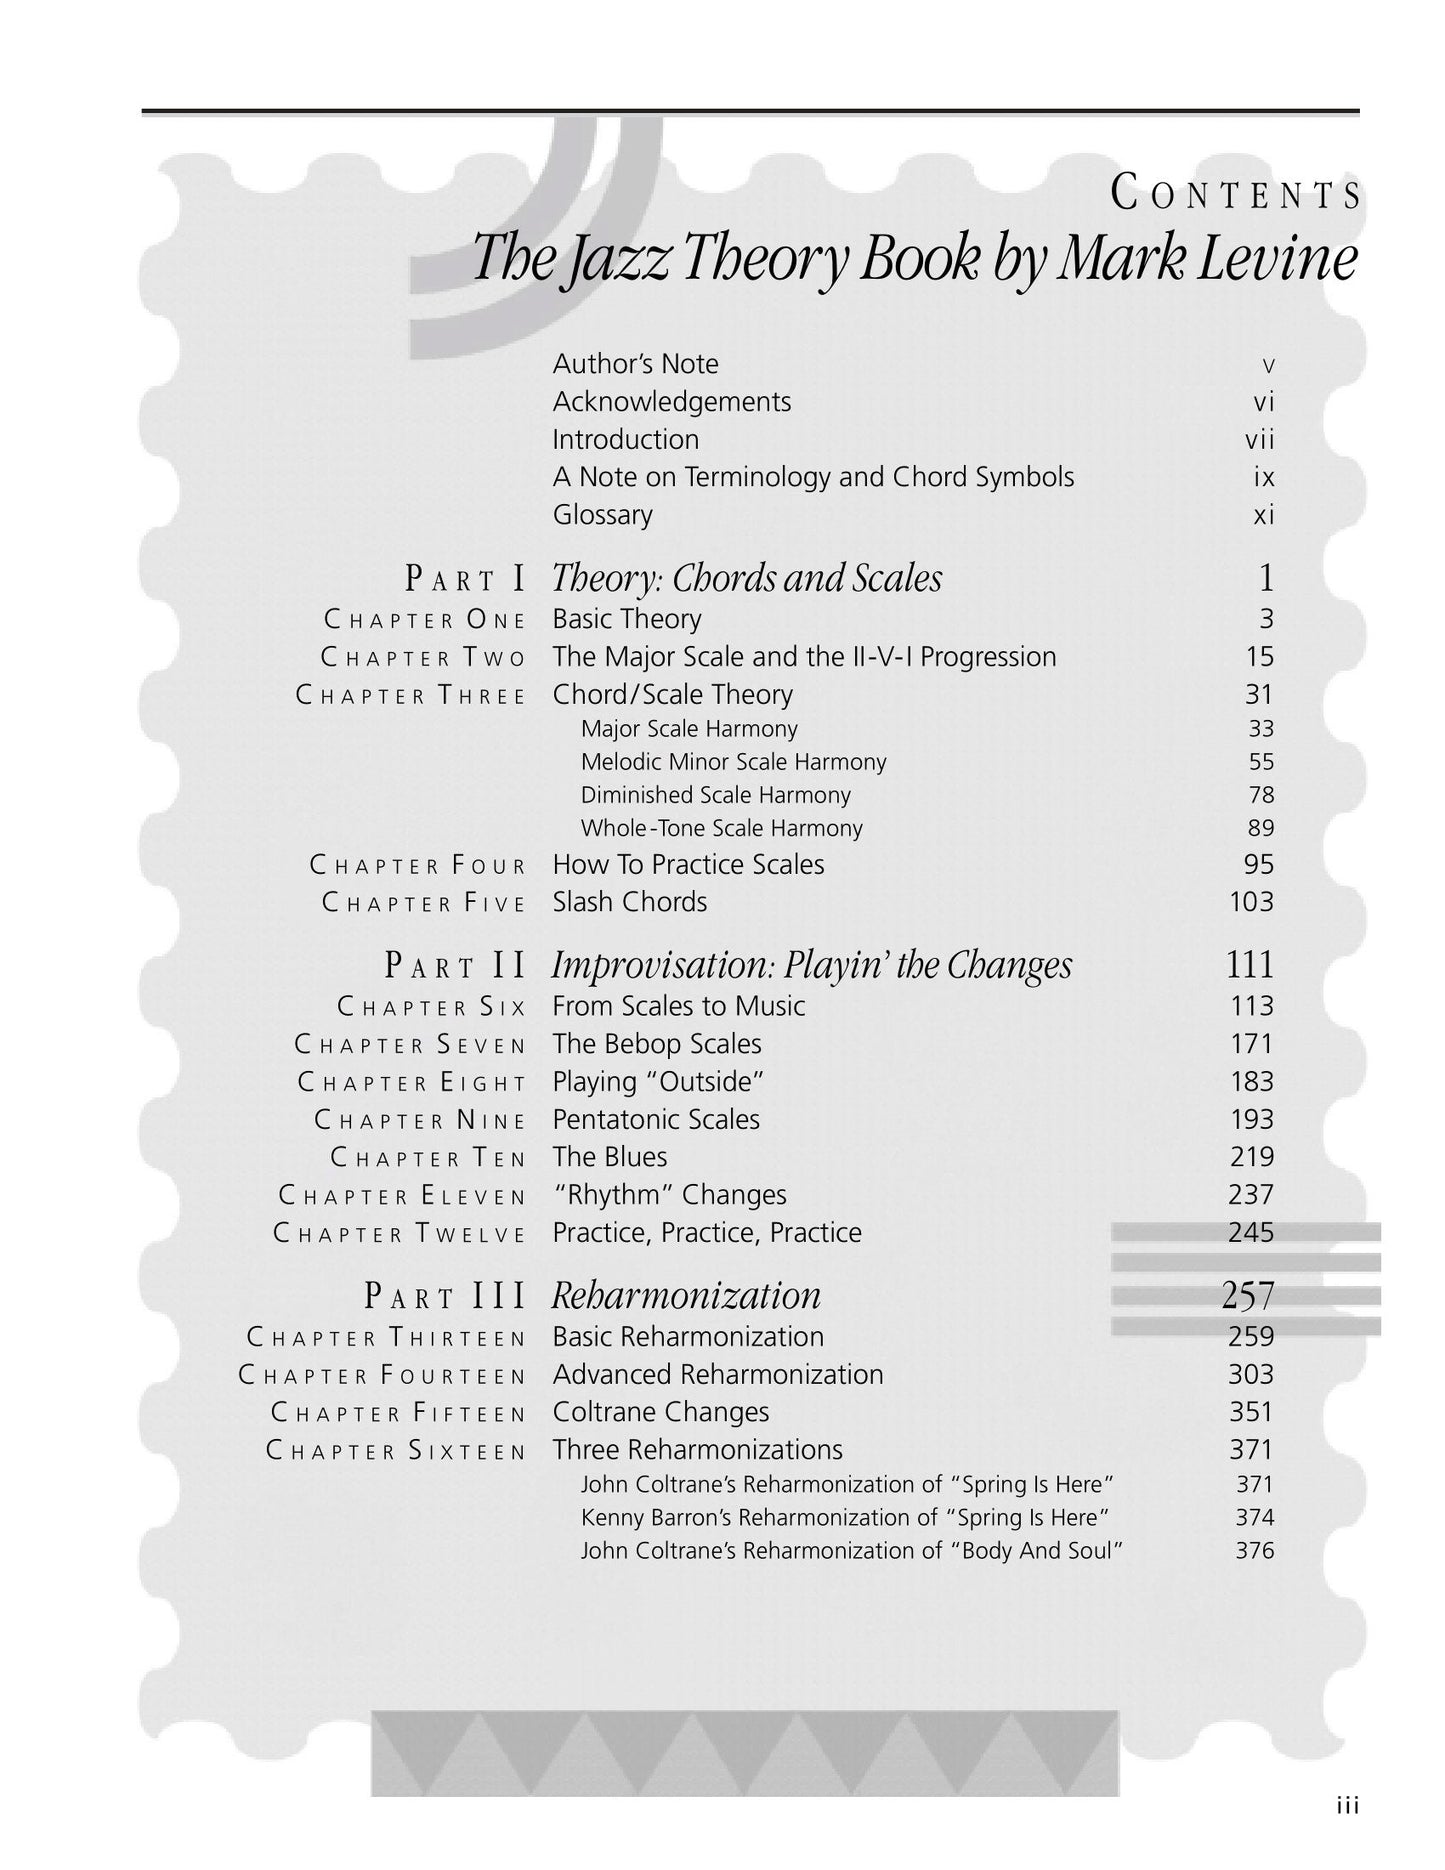 The Jazz Theory Book - Most Comprehensive Study Of Harmony And